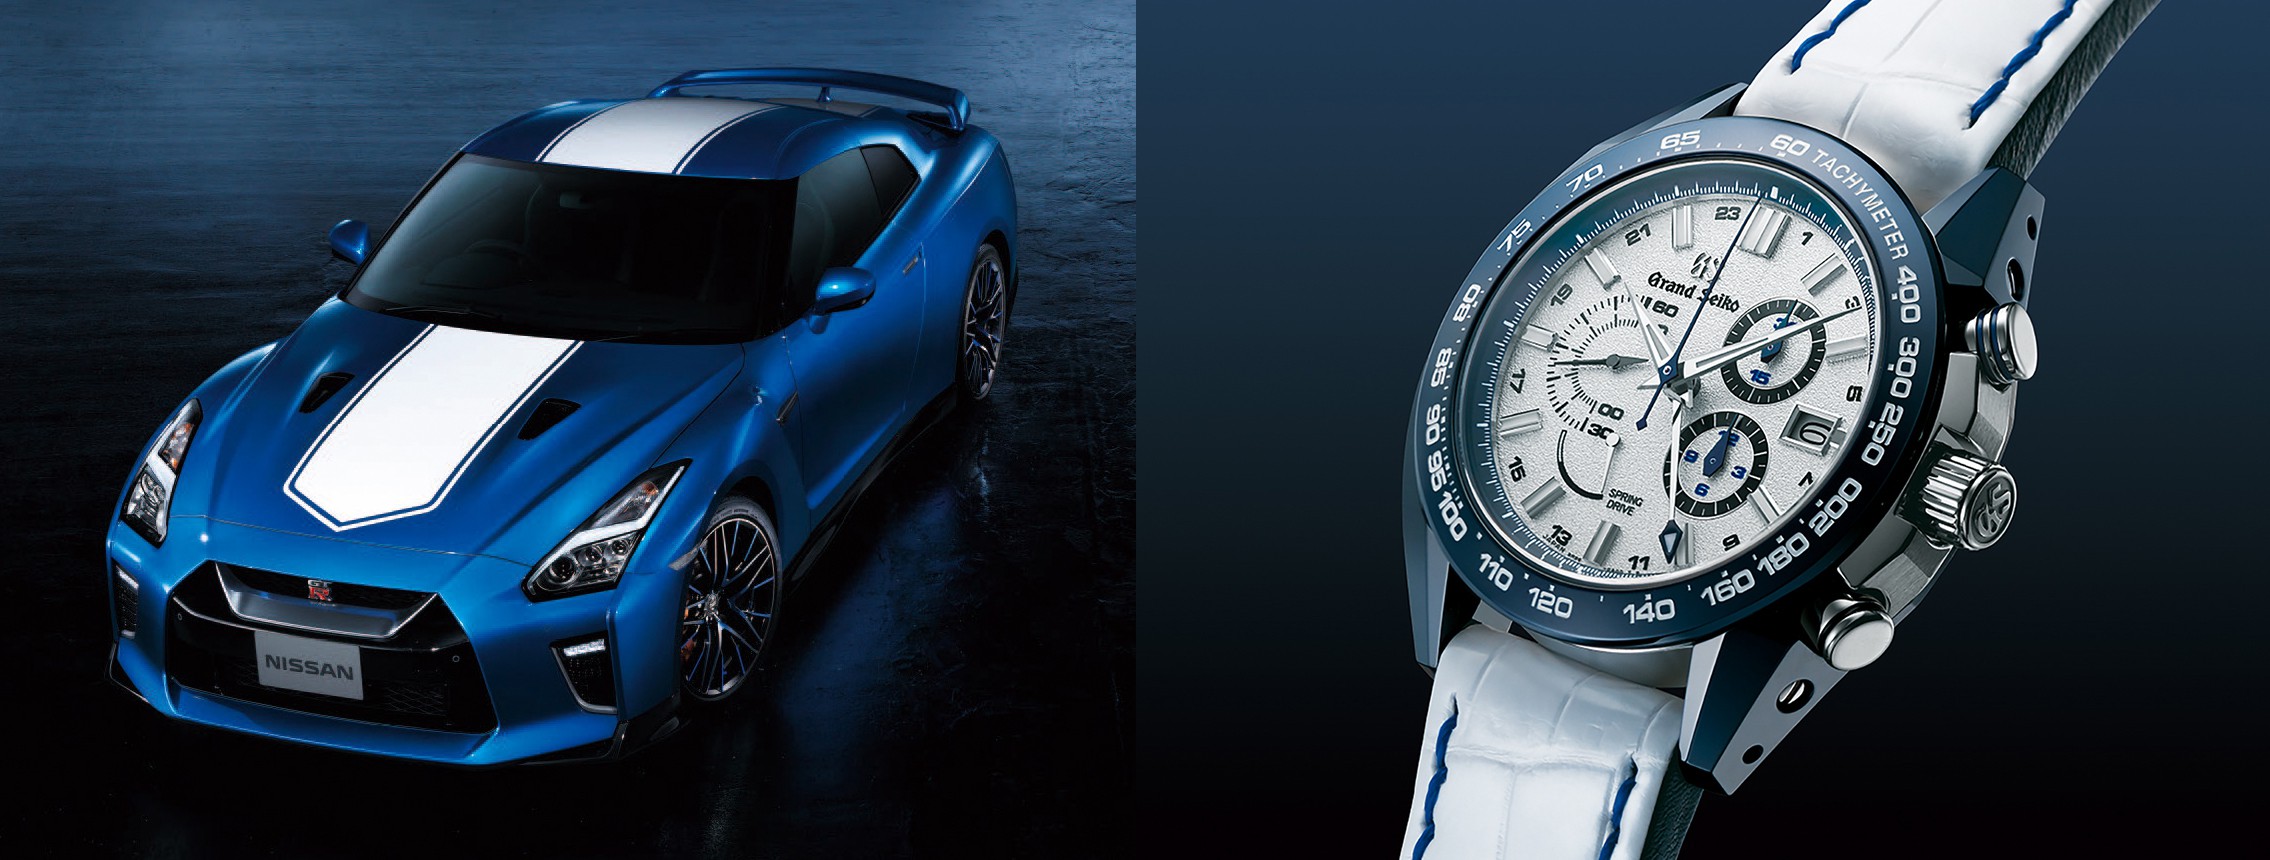 20 years of Spring Drive and 50 years of the NISSAN GT-R are celebrated in  a limited edition Grand Seiko watch. | Grand Seiko